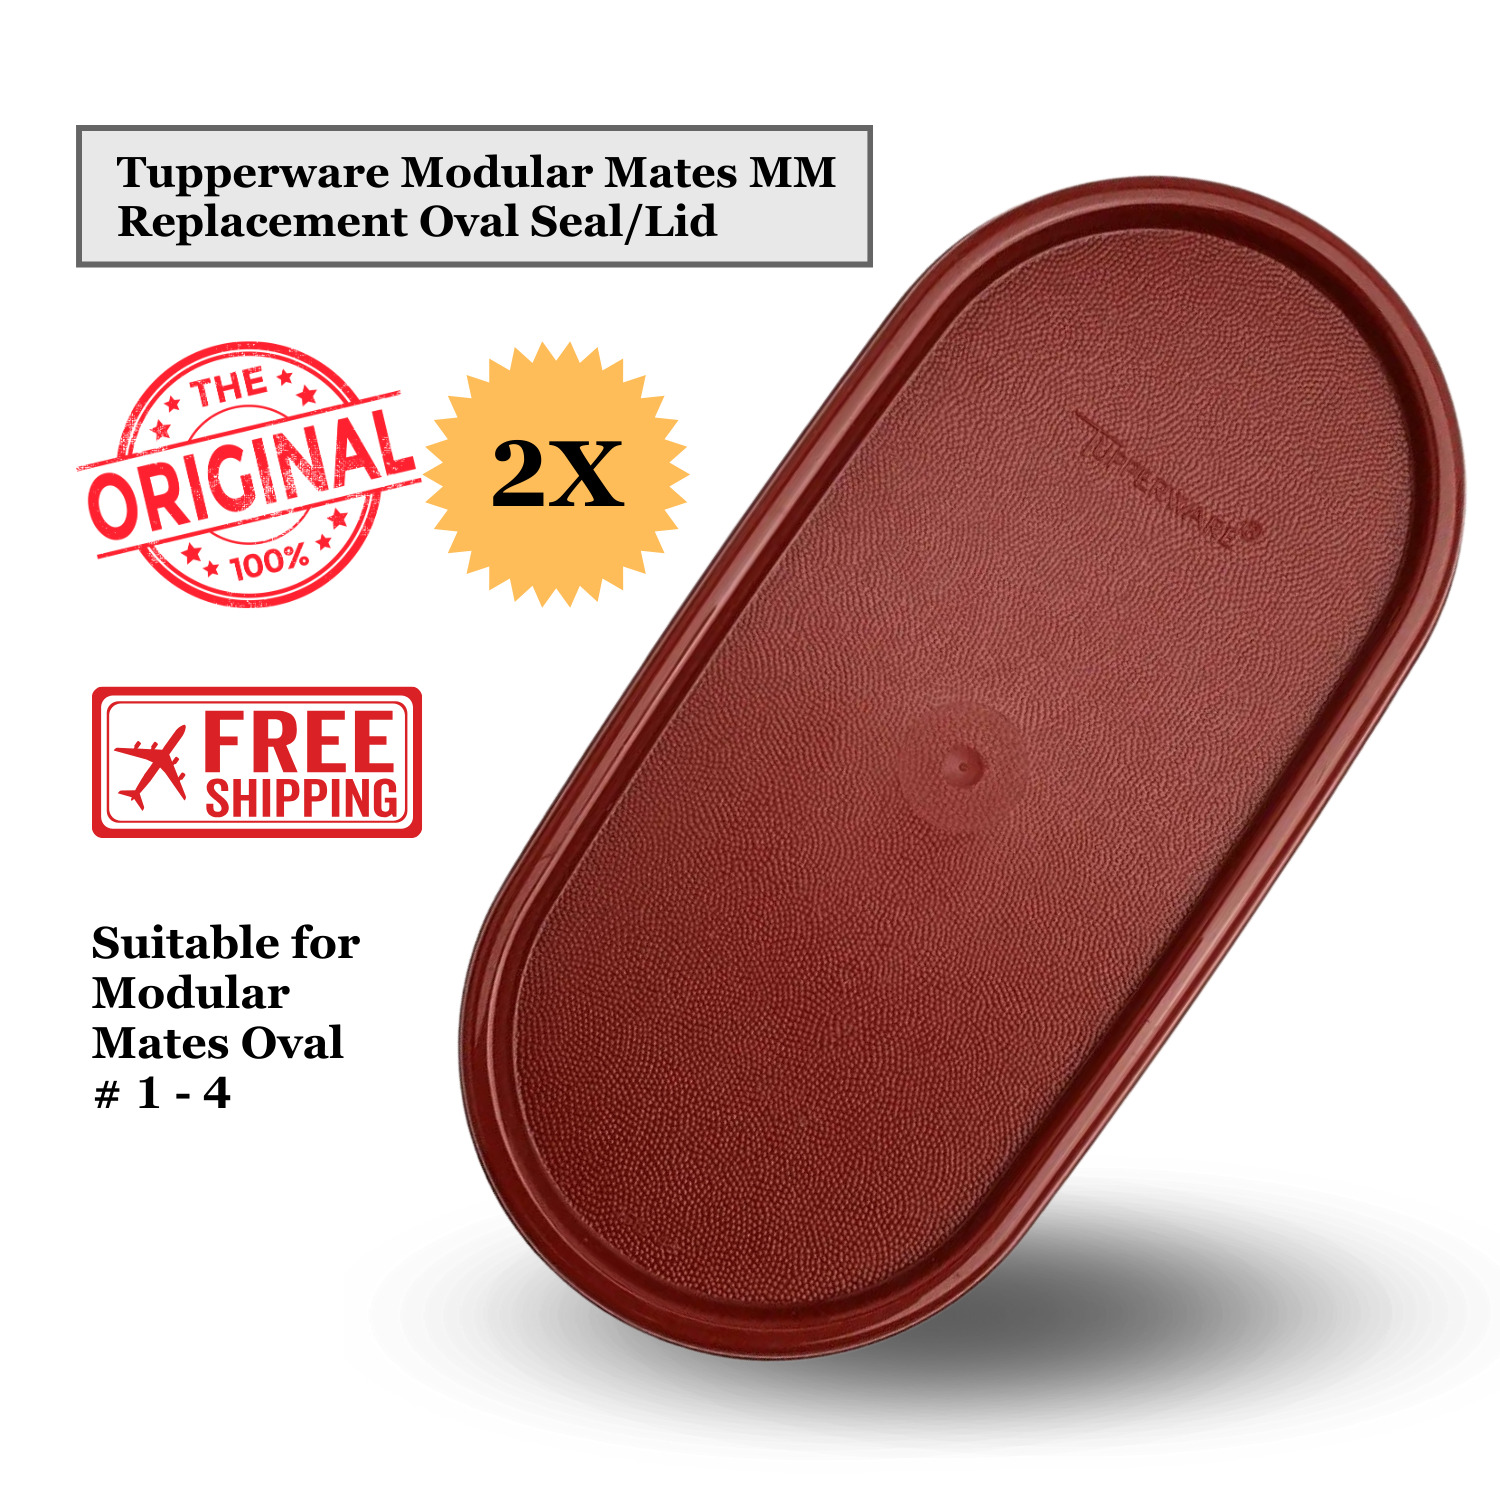 NEW Oval Dark Red Tupperware Modular Mates #1616 Replacement Seal/Lid Set of 2